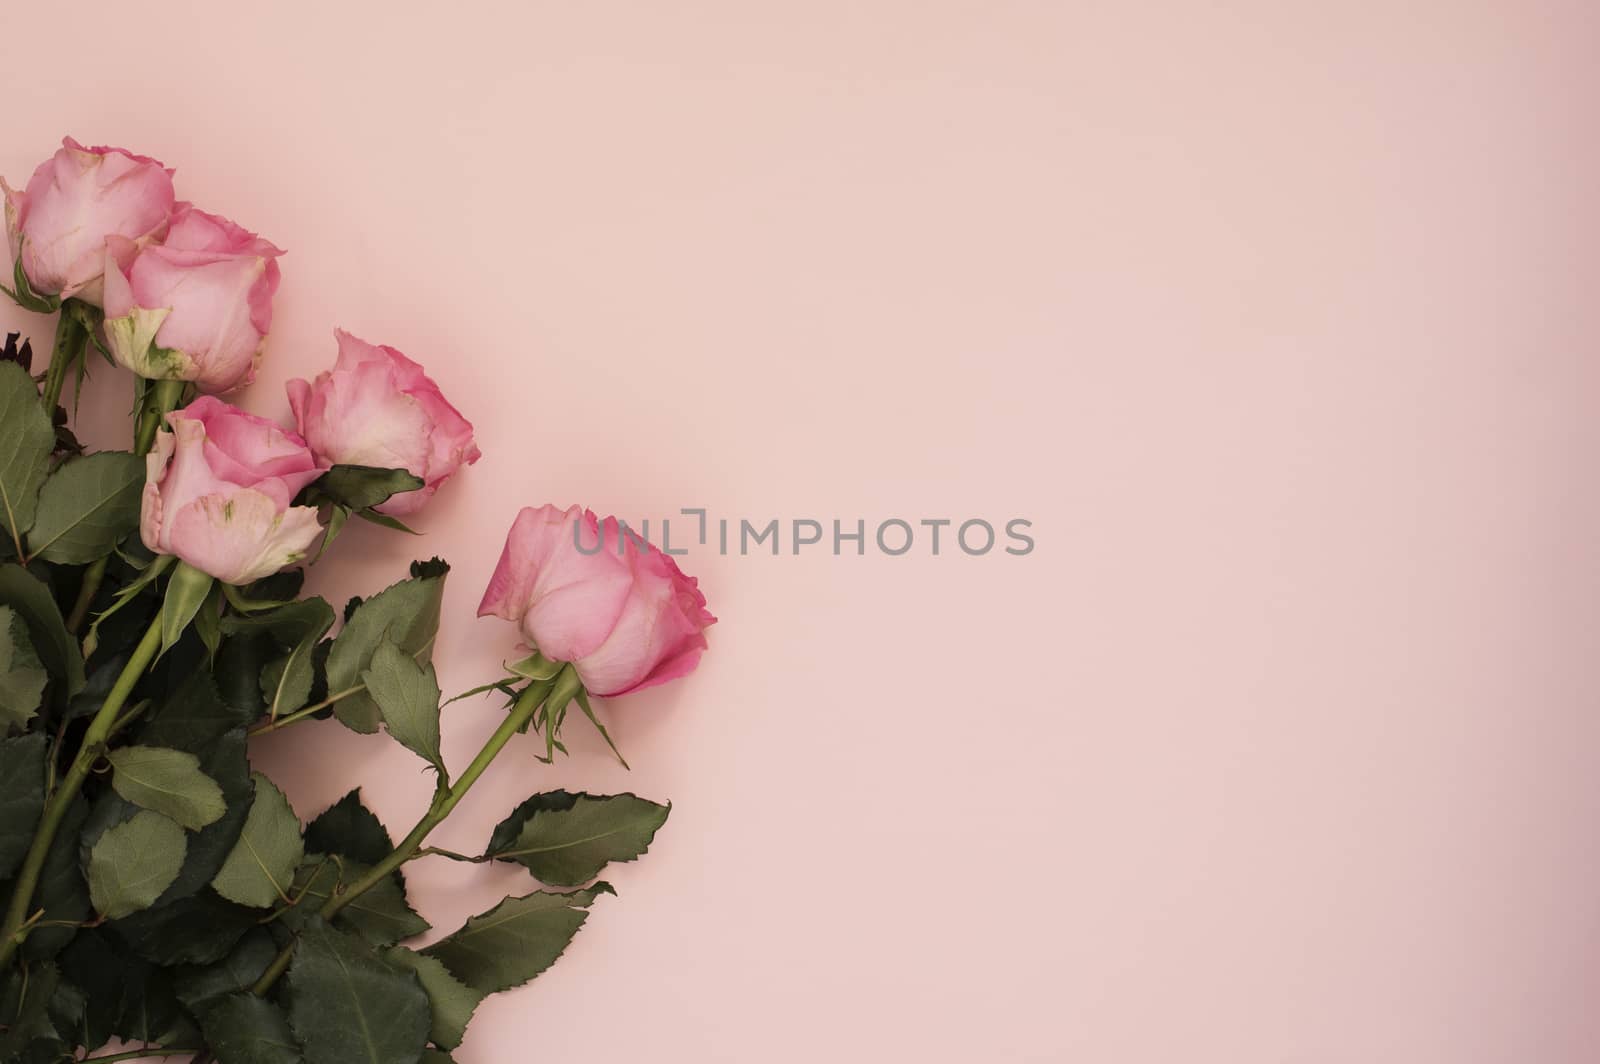 Stunning pink bouquet of roses on punchy pink background. Copy space, floral frame. Wedding, gift card, valentine's day or mothers day background